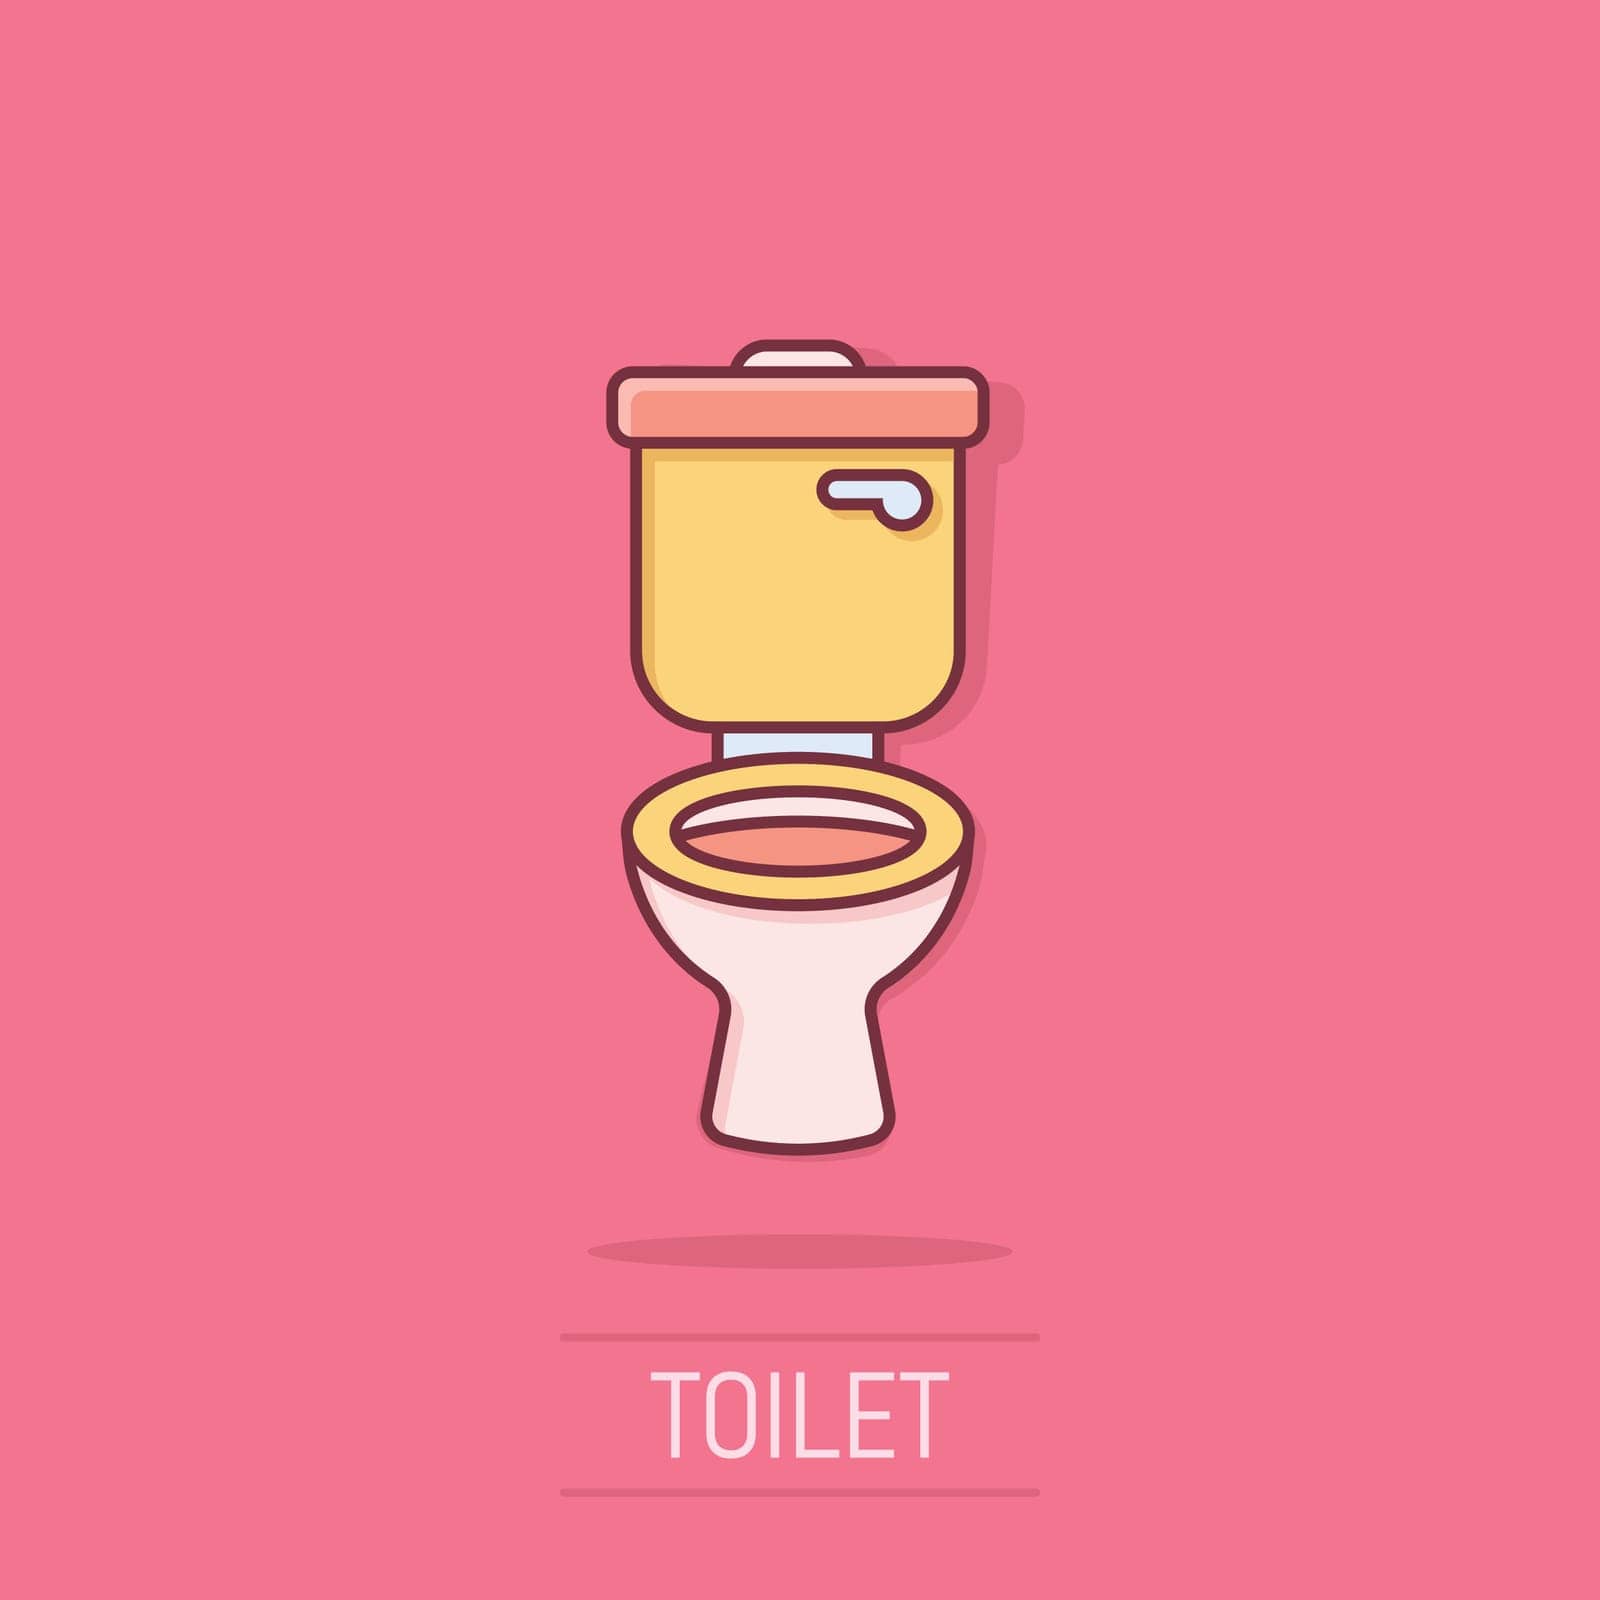 Toilet bowl icon in comic style. Hygiene cartoon vector illustration on isolated background. WC restroom splash effect sign business concept. by LysenkoA